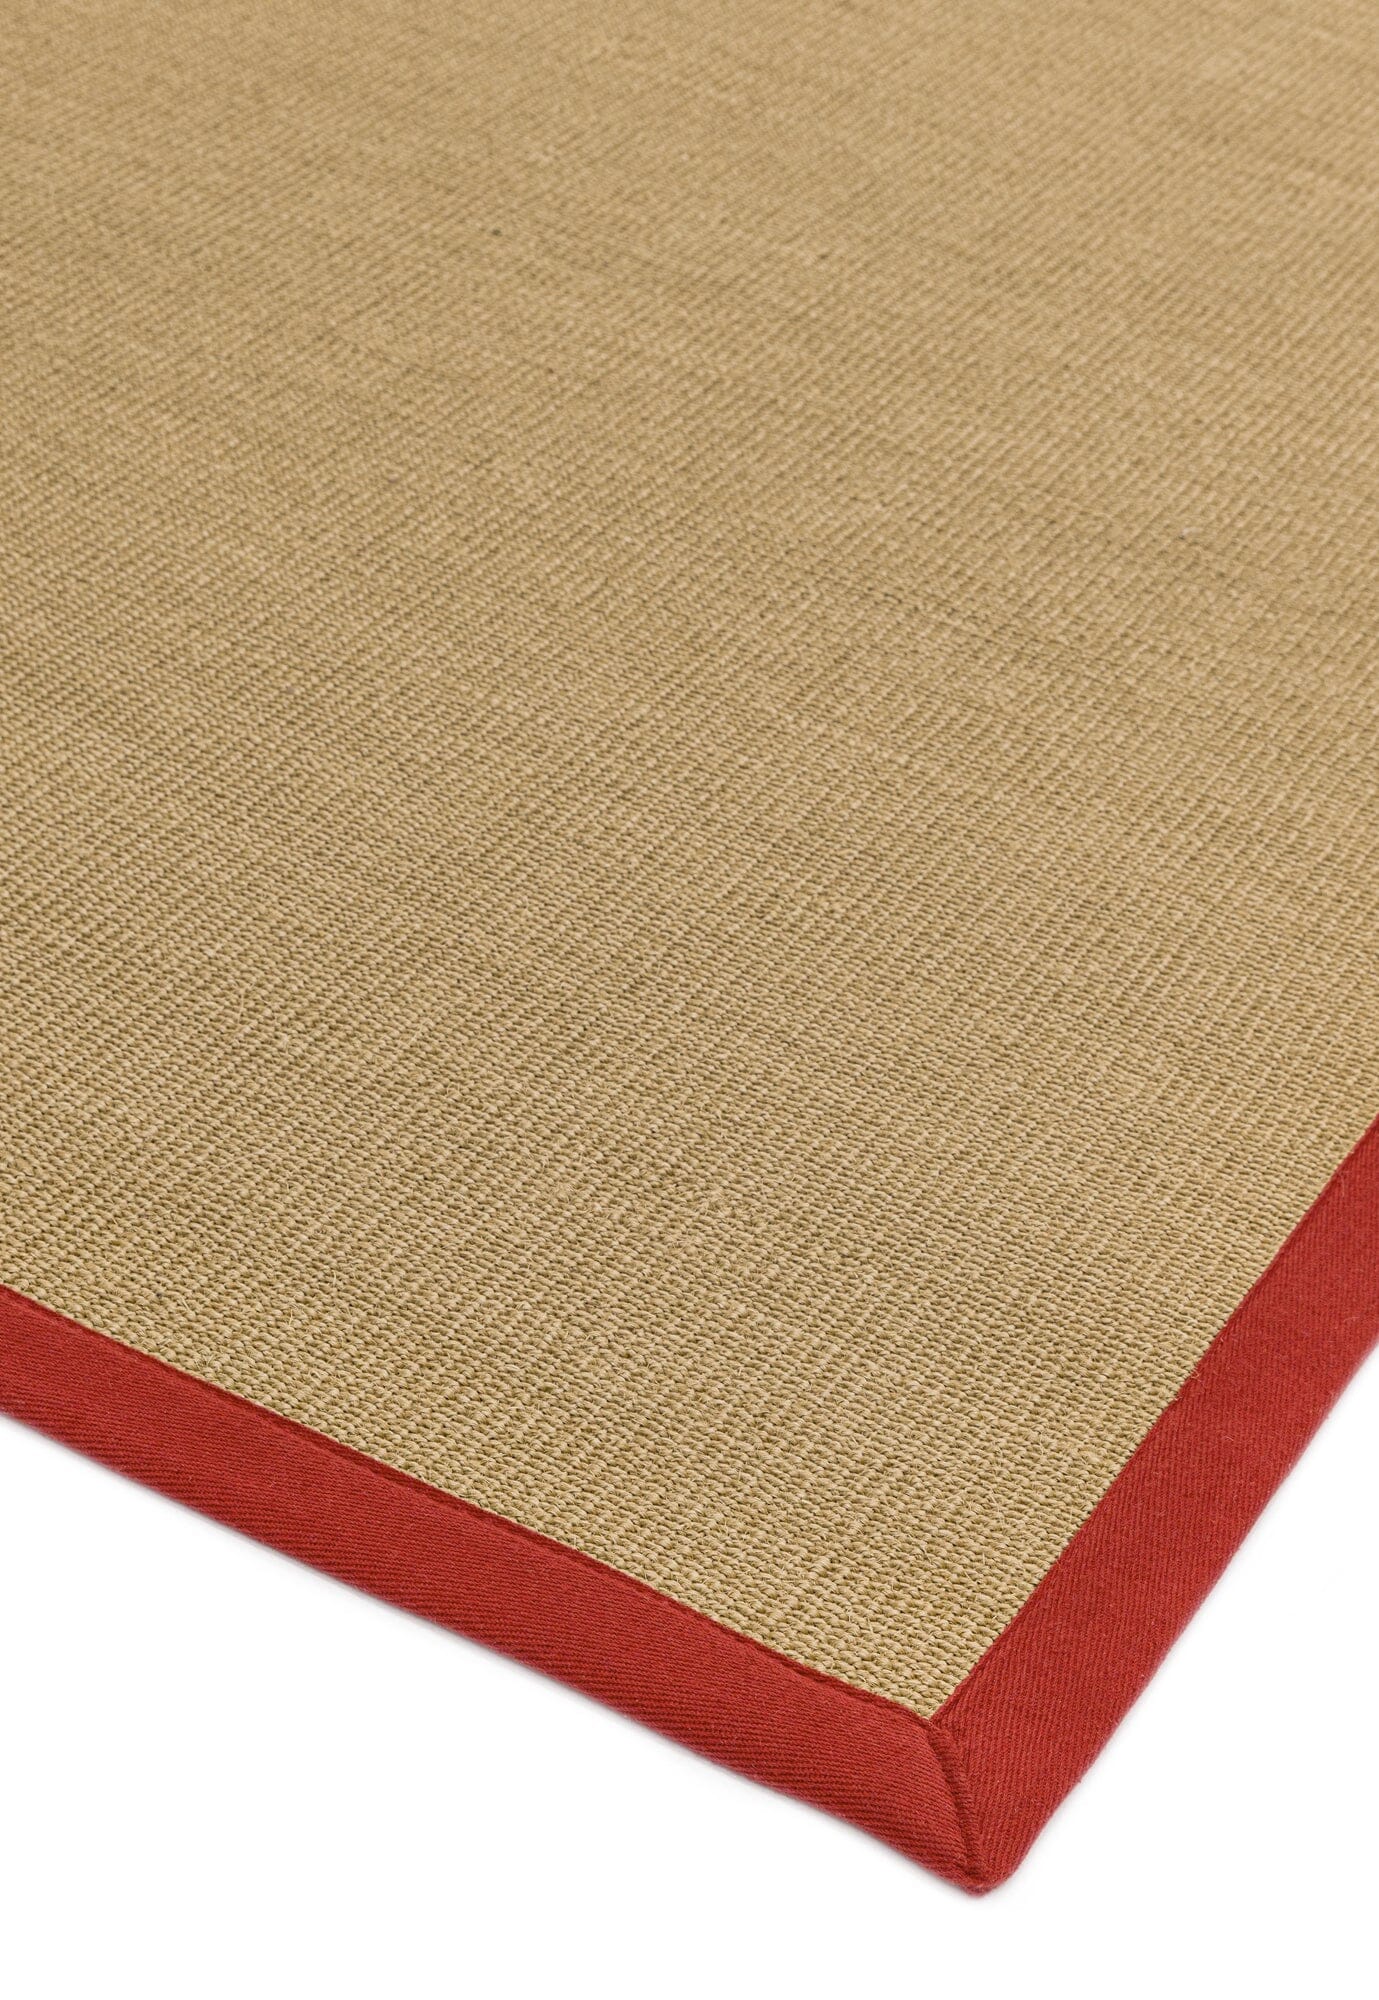  Asiatic Carpets-Asiatic Carpets Sisal Machine Woven Rug Linen/Red - 120 x 180cm-Beige, Natural 573 